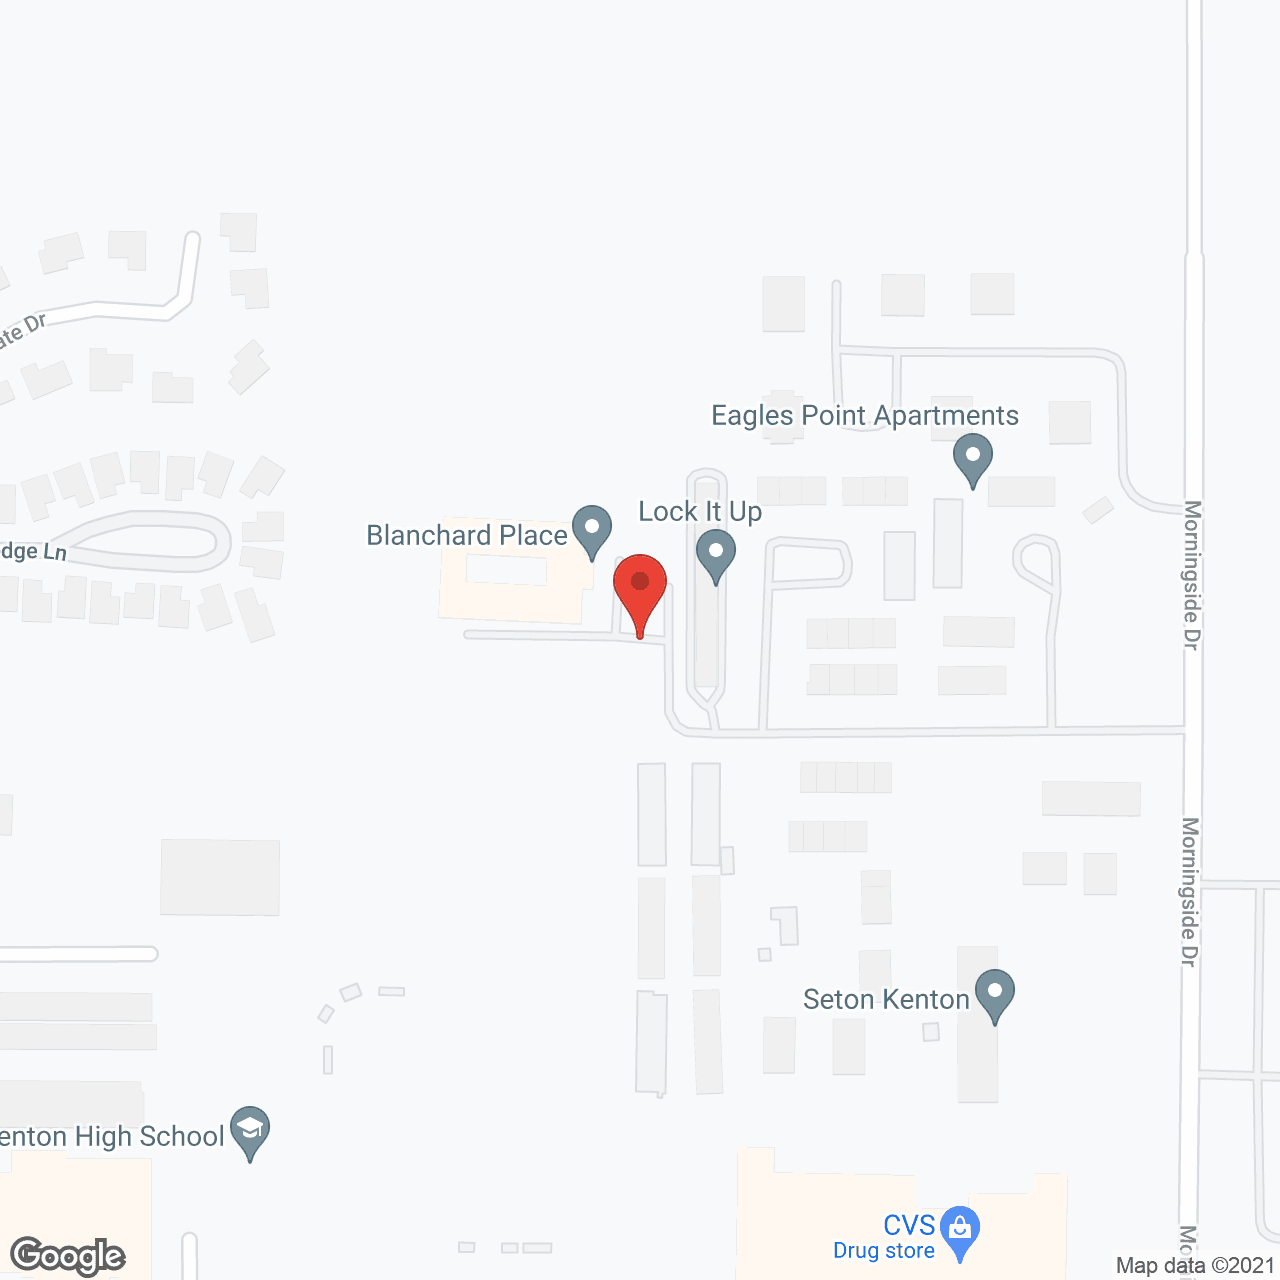 Trustwell Living at Blanchard Place in google map